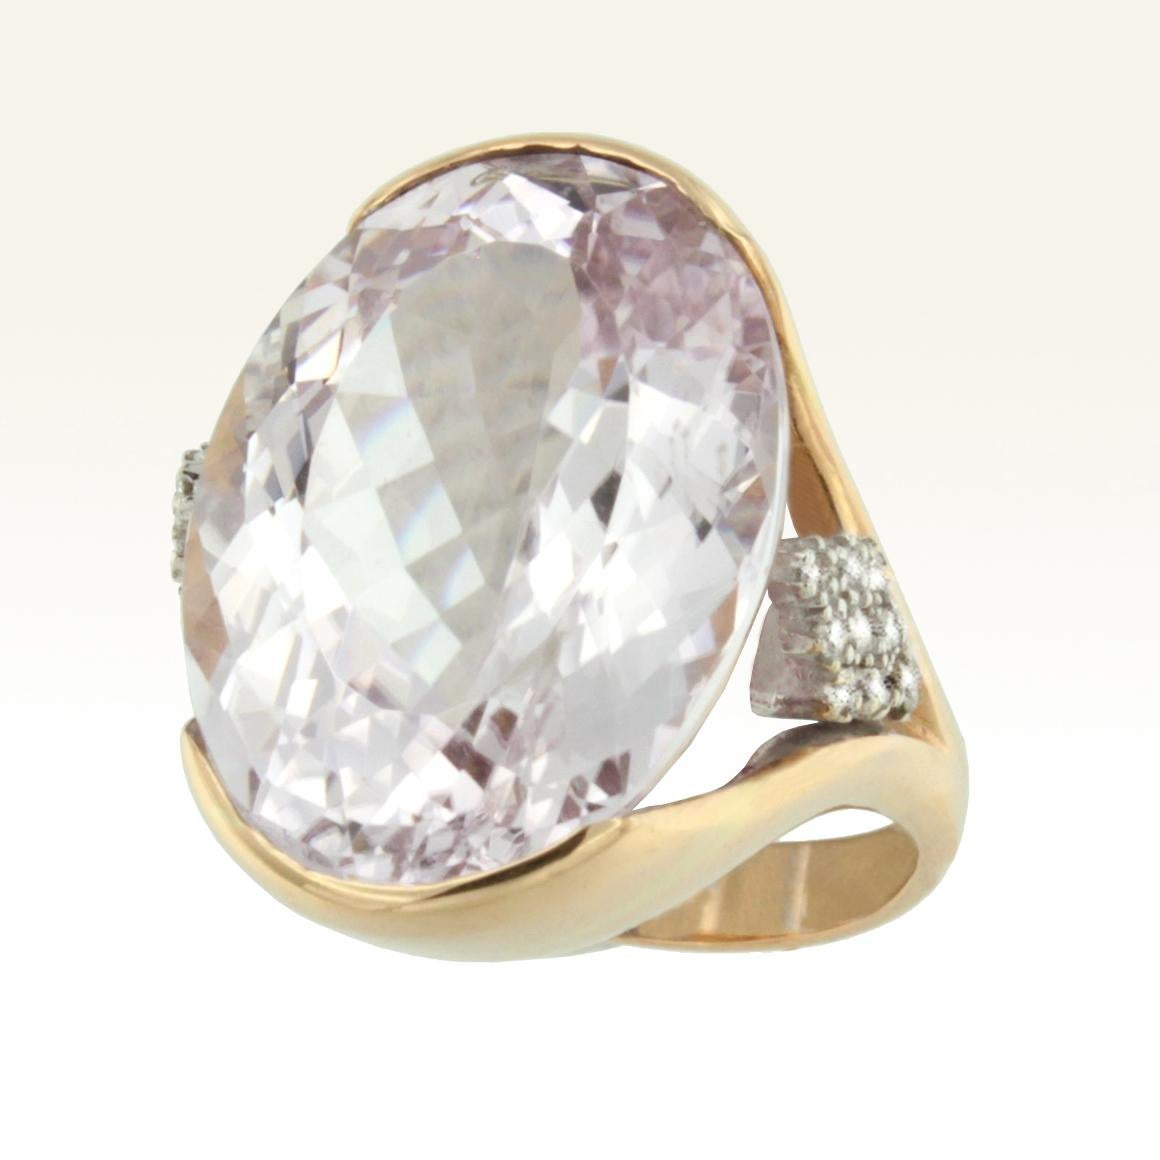 Ring in 18k white and rose gold with Kunzite (oval cut, size: 16x22 mm; carats 25,75 ) and Diamonds karat 0.20 VS colour G/H   g.14.80
Kunzite is the perfect stone for those who sometimes can't resist emotions, bright pink color. Amazing cocktail